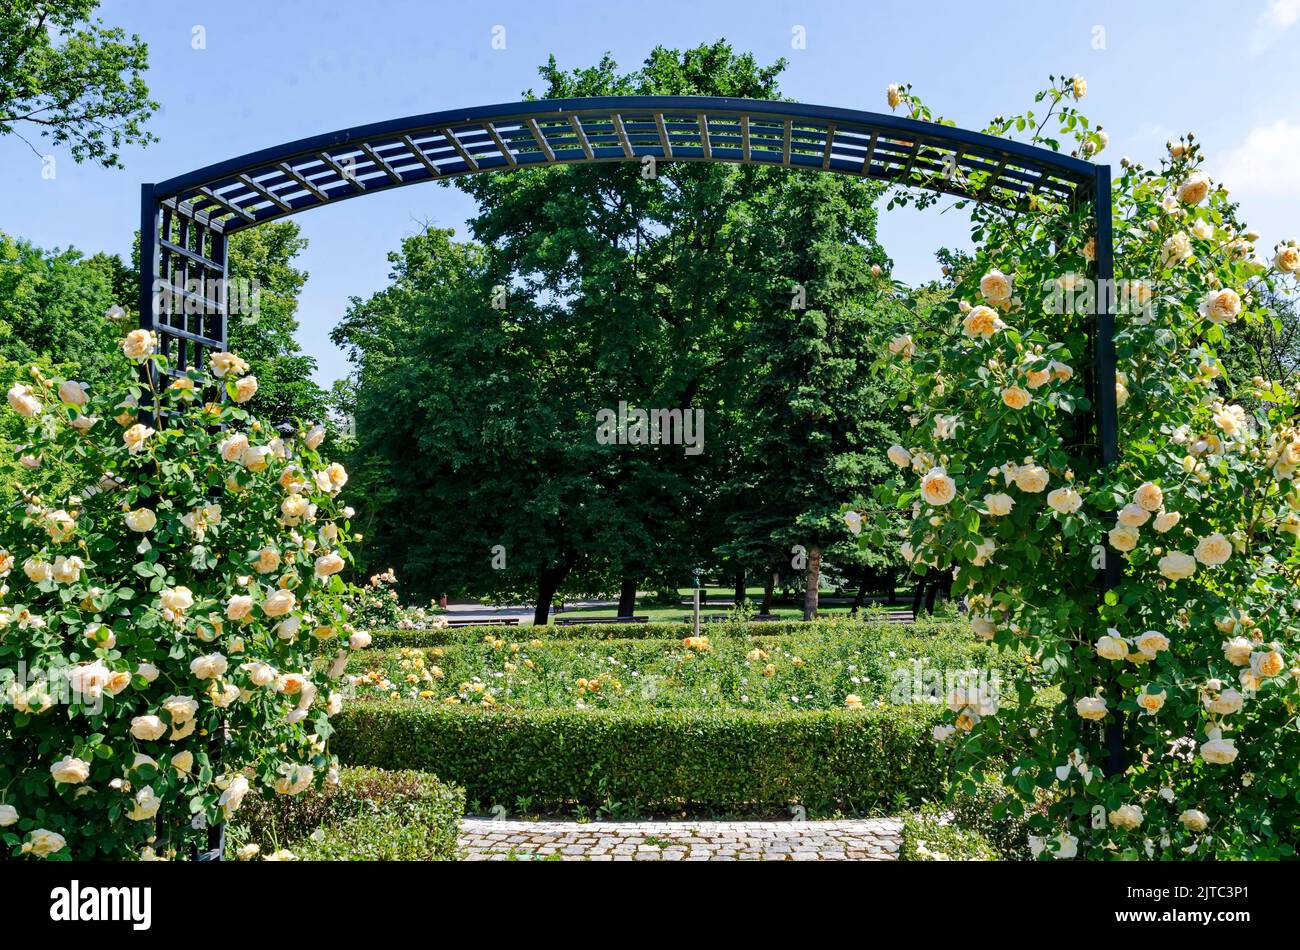 Part of a rose garden with beautiful bushes with white flowers, Sofia, Bulgaria Stock Photo